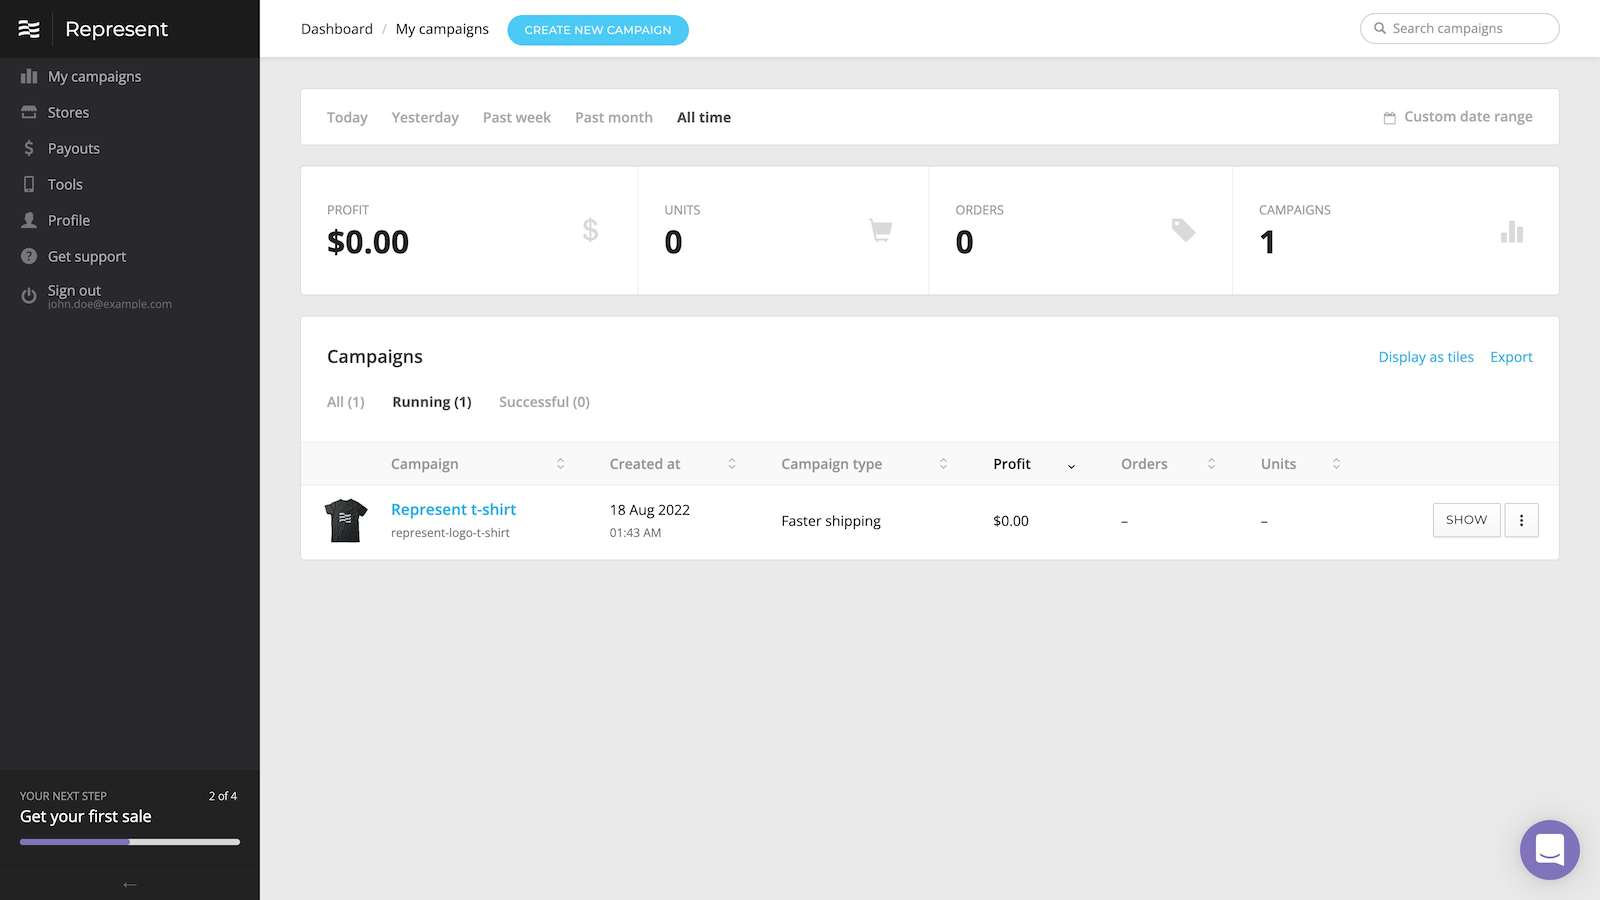 Represent dashboard with products you want to sell via Shopify